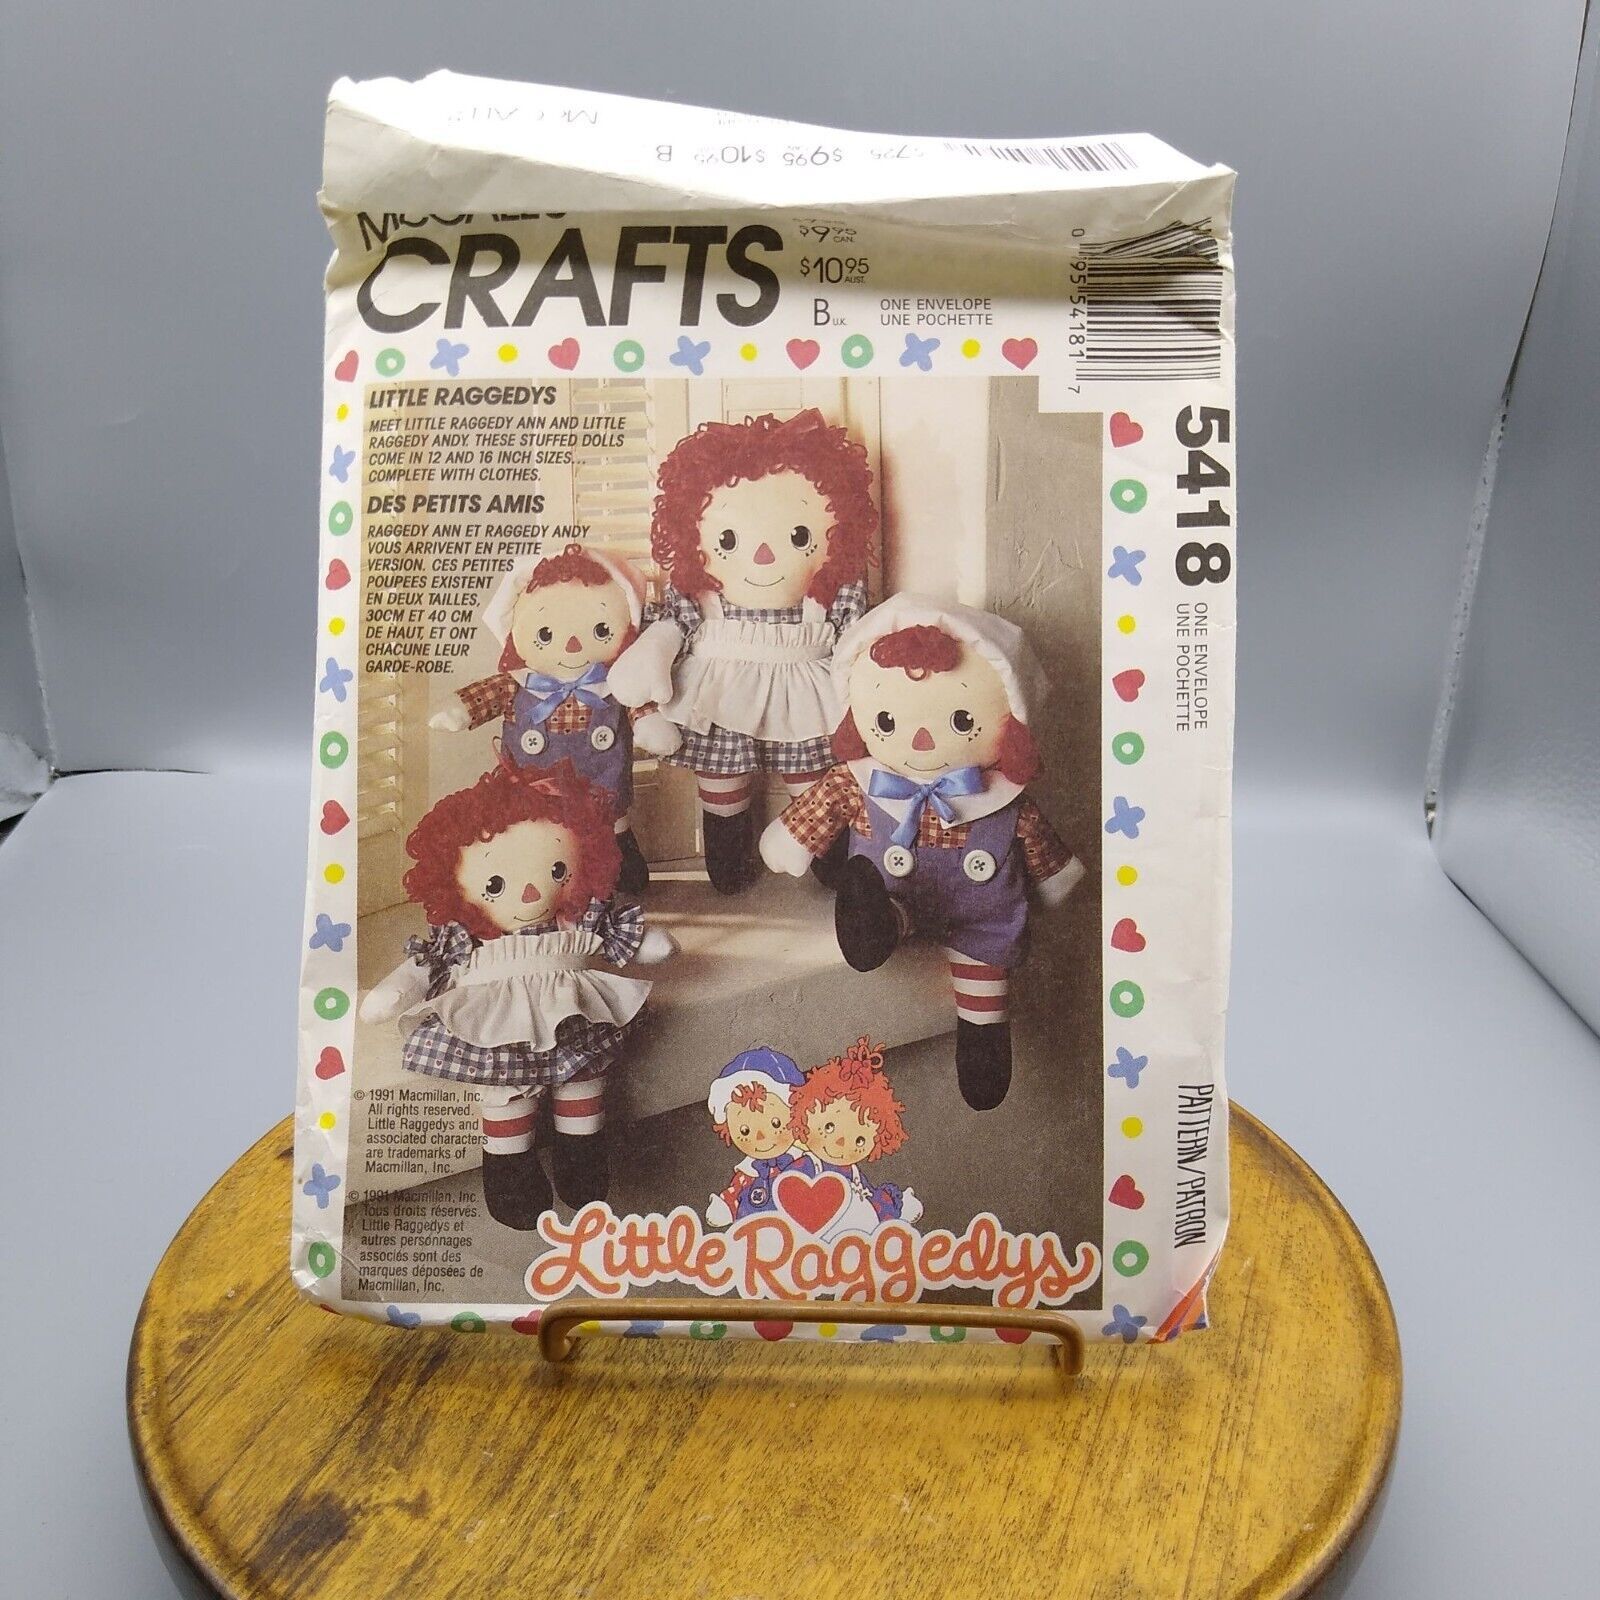 UNCUT Vintage Craft Sewing PATTERN McCalls 5418 Little Raggedy Dolls, Clothes - $20.13